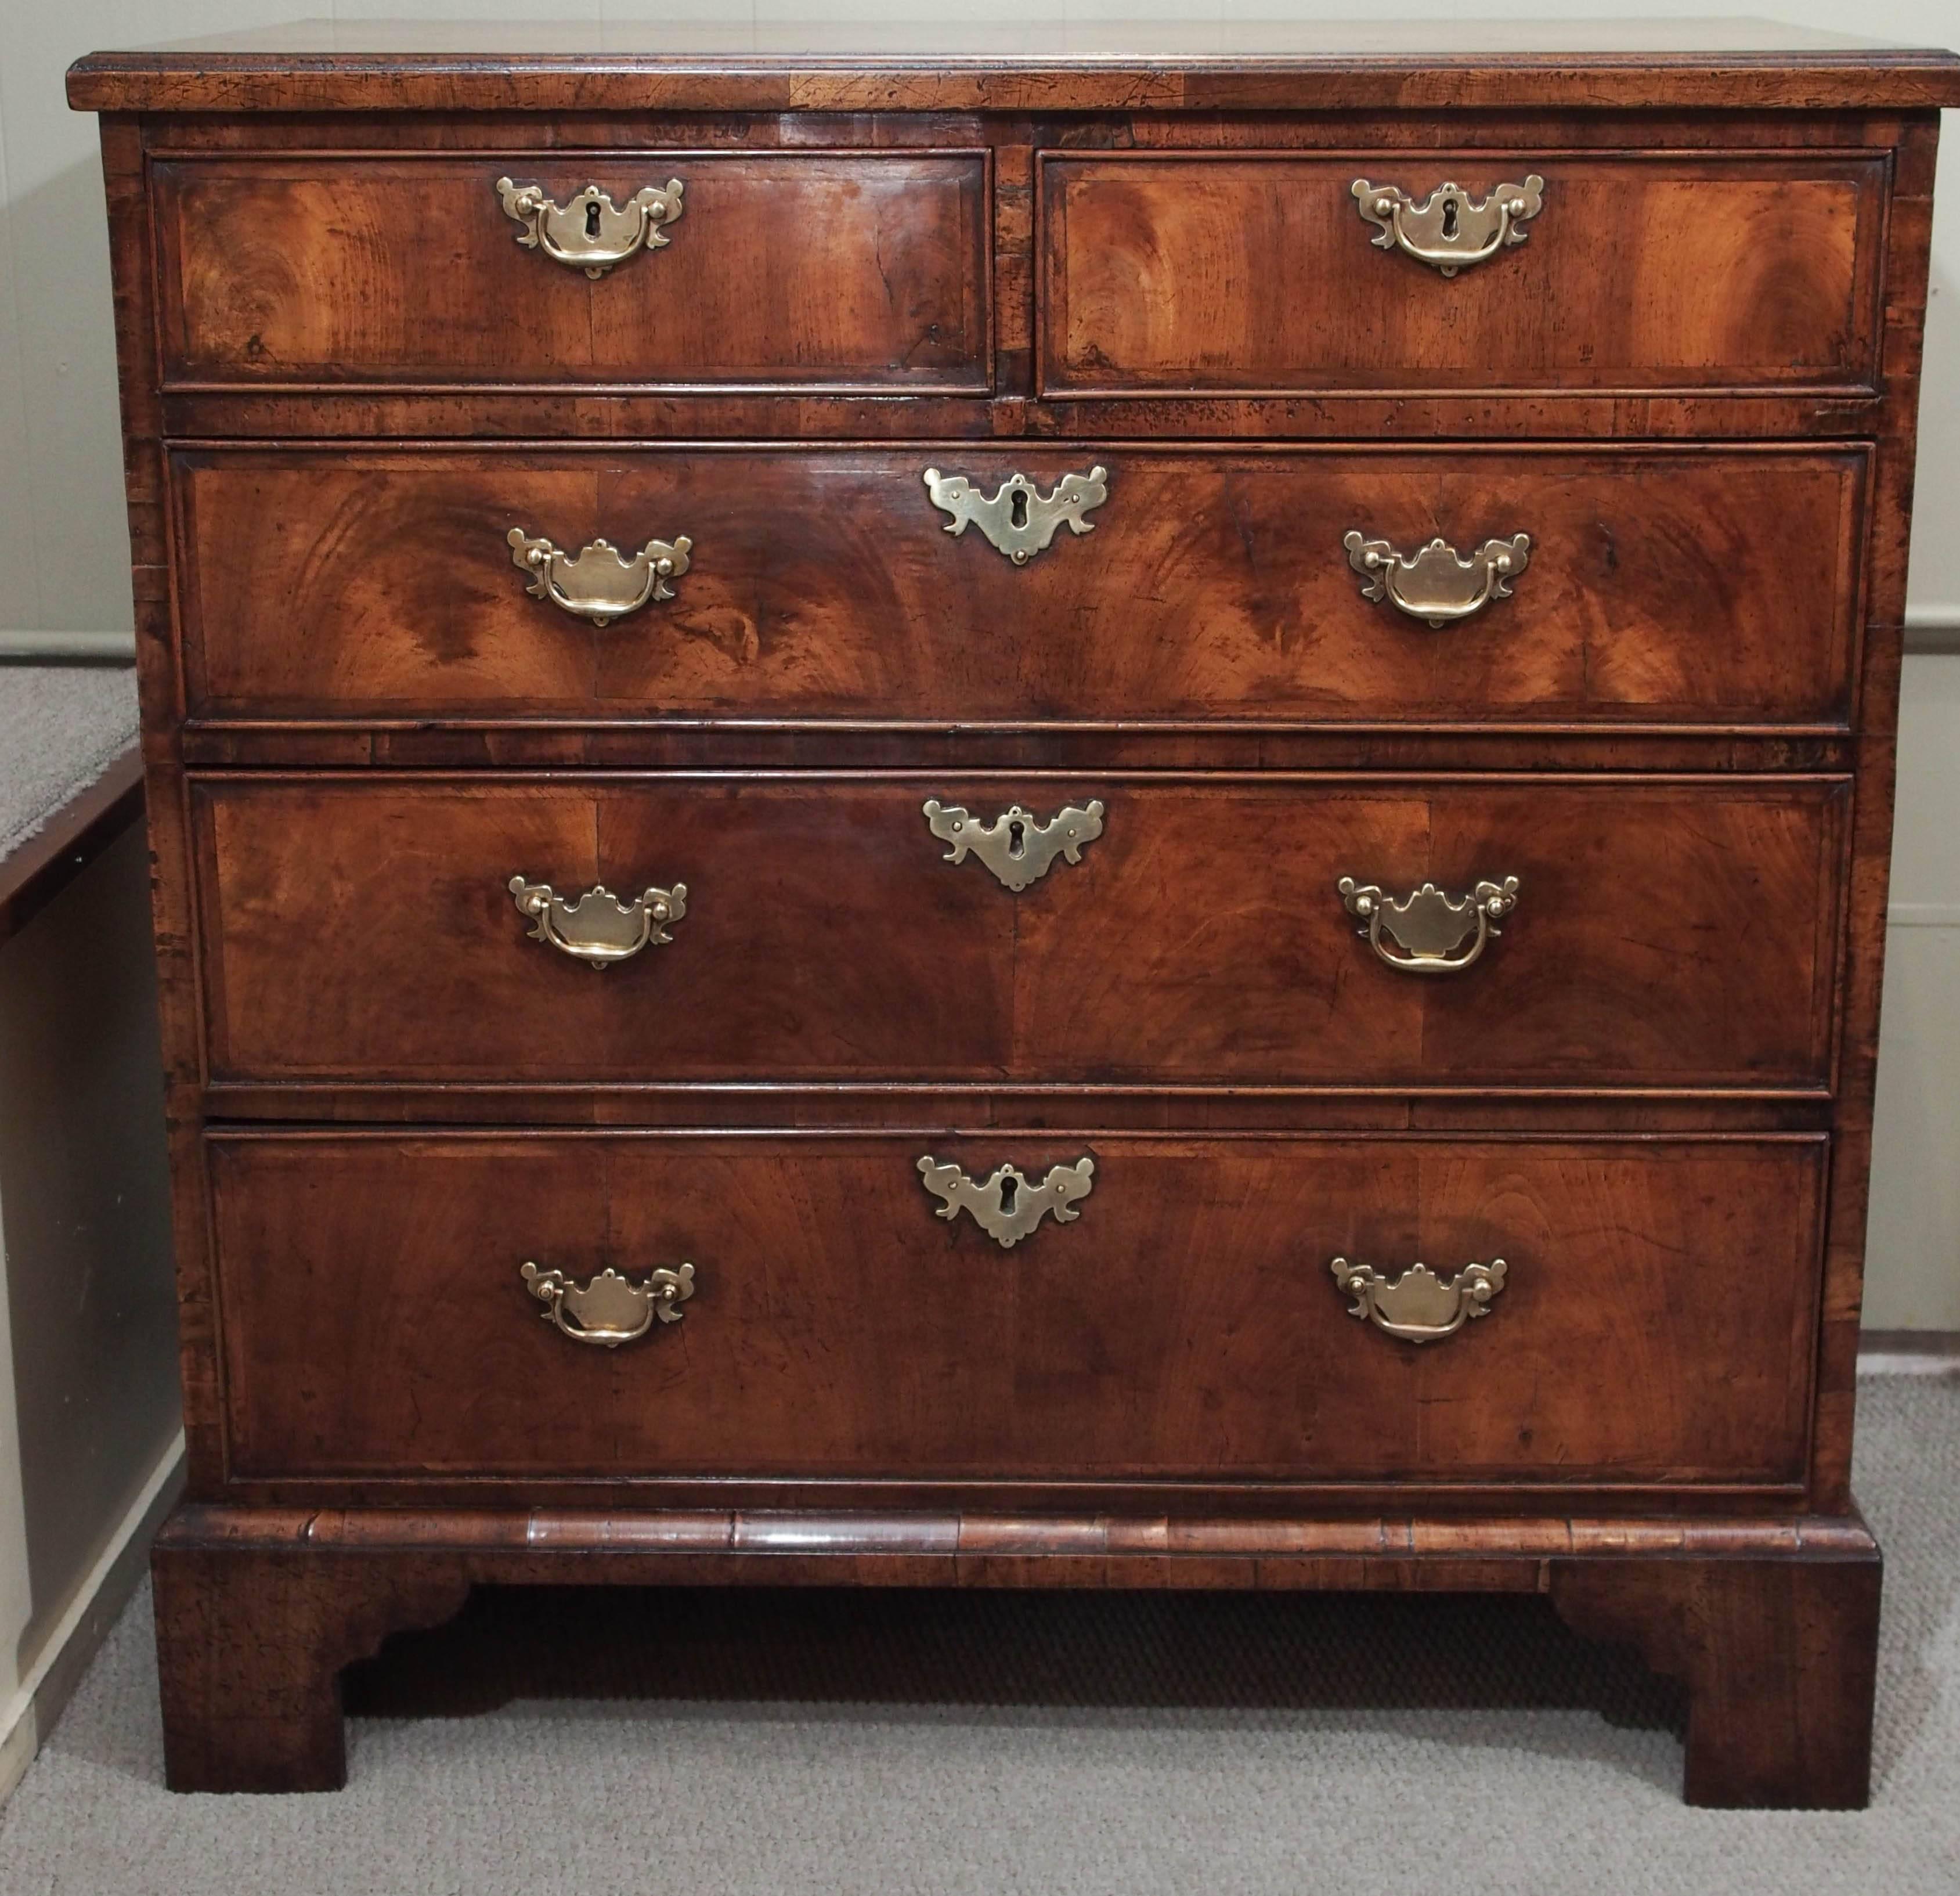 Early 18th century walnut chest of drawers, circa 1730. Crossbanded top and sides.